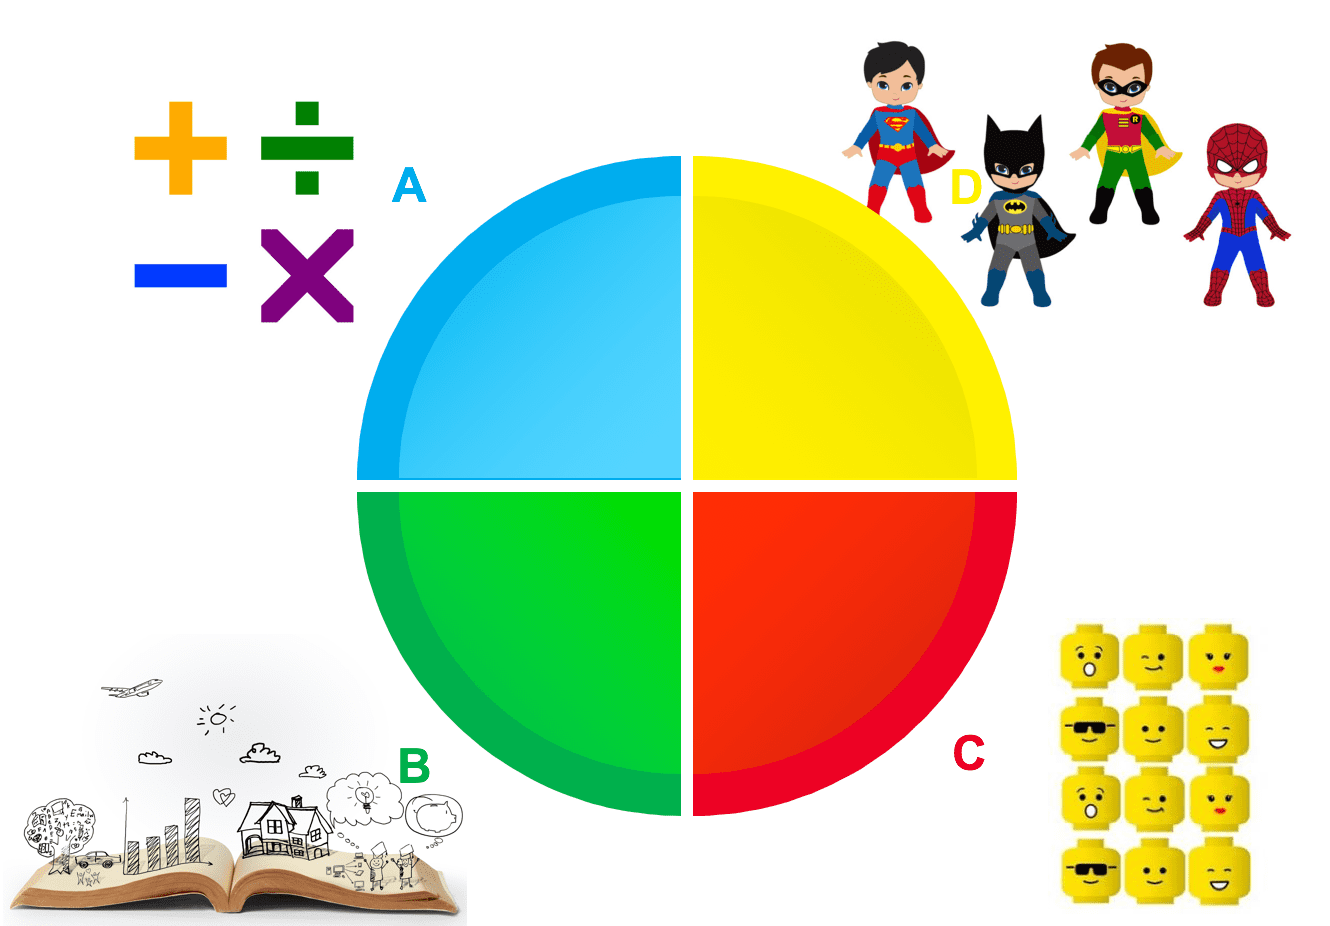 HBDI model with math, superhero, book and emoticon icons for each colour